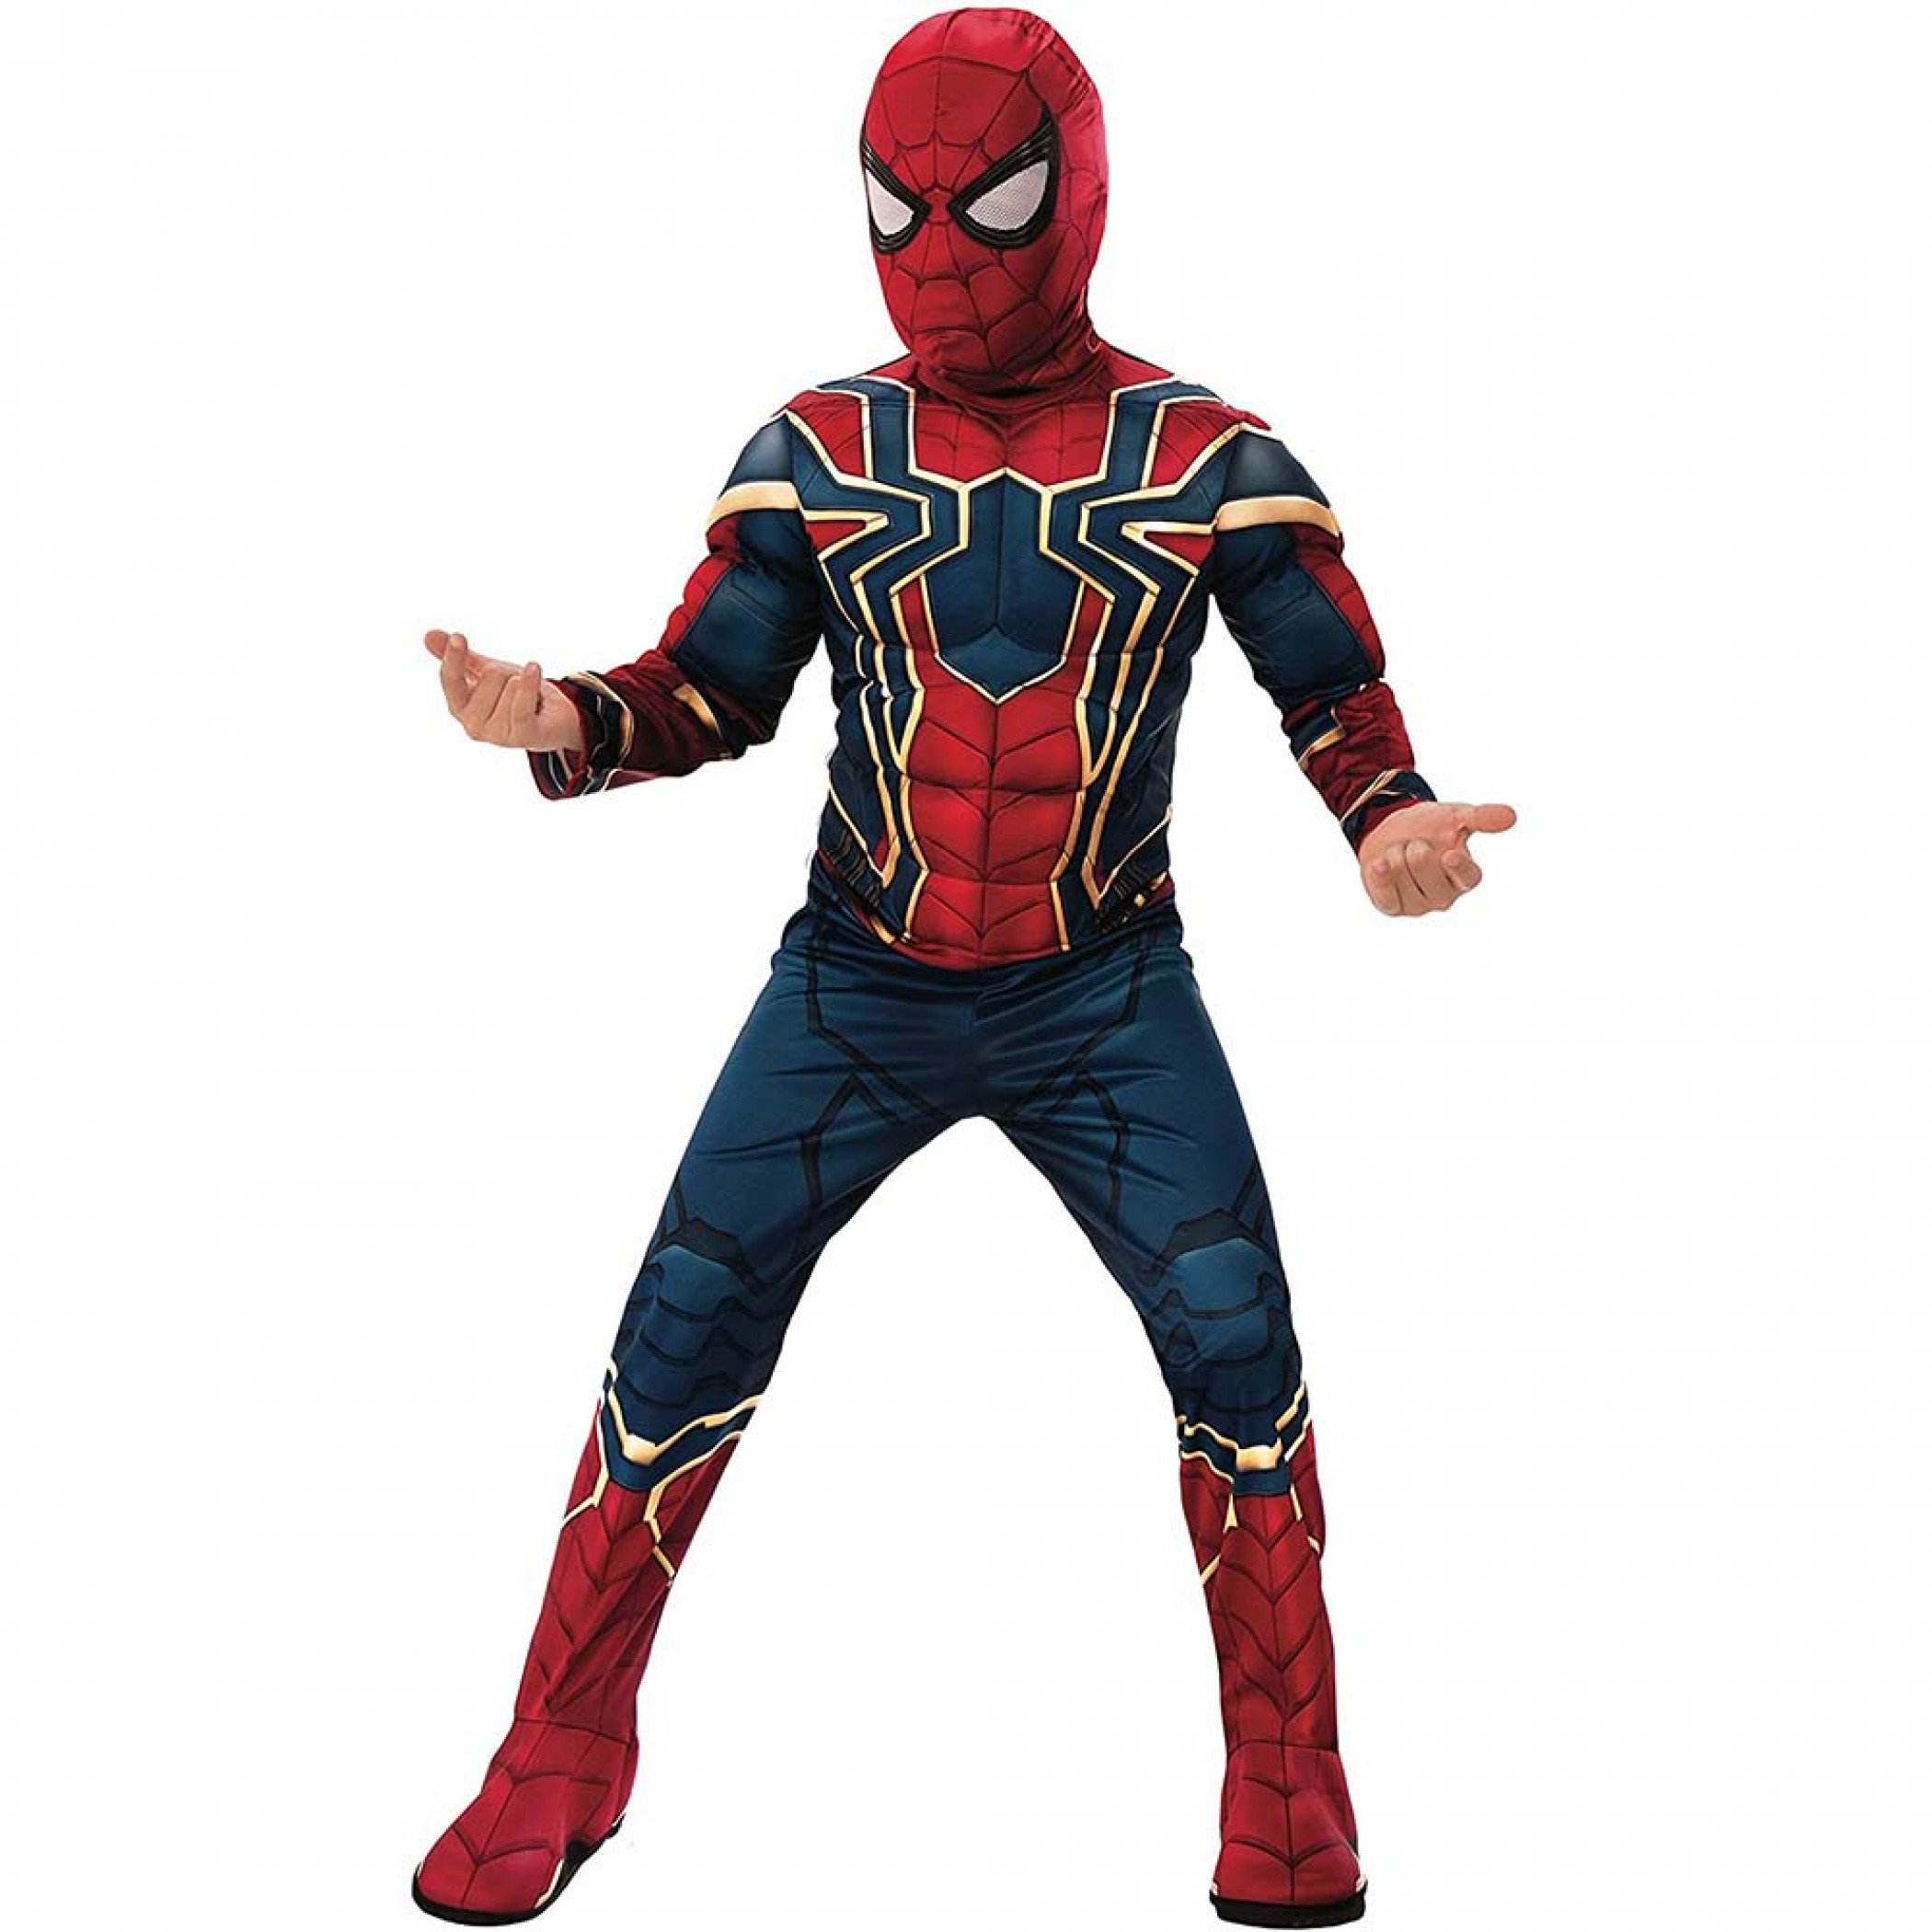 Marvel Comics Spider-Man Iron Spider Youth Deluxe Costume